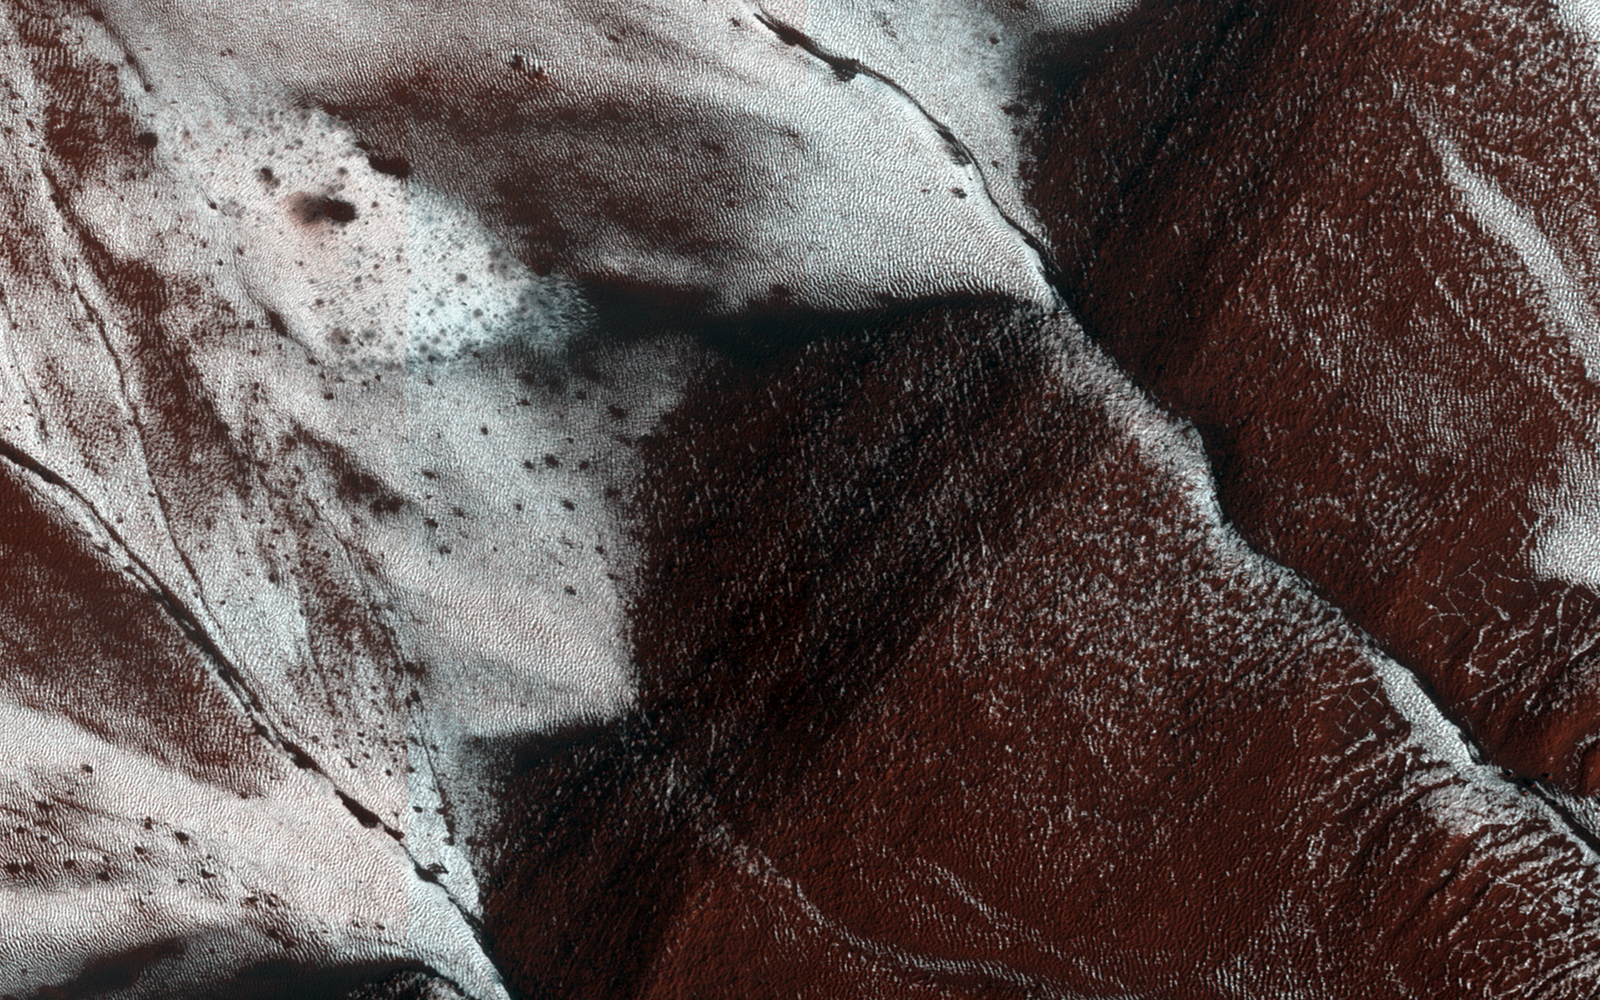 This HiRISE image shows gullies on a south-facing slope of a crater touched with late-Spring carbon dioxide frost.